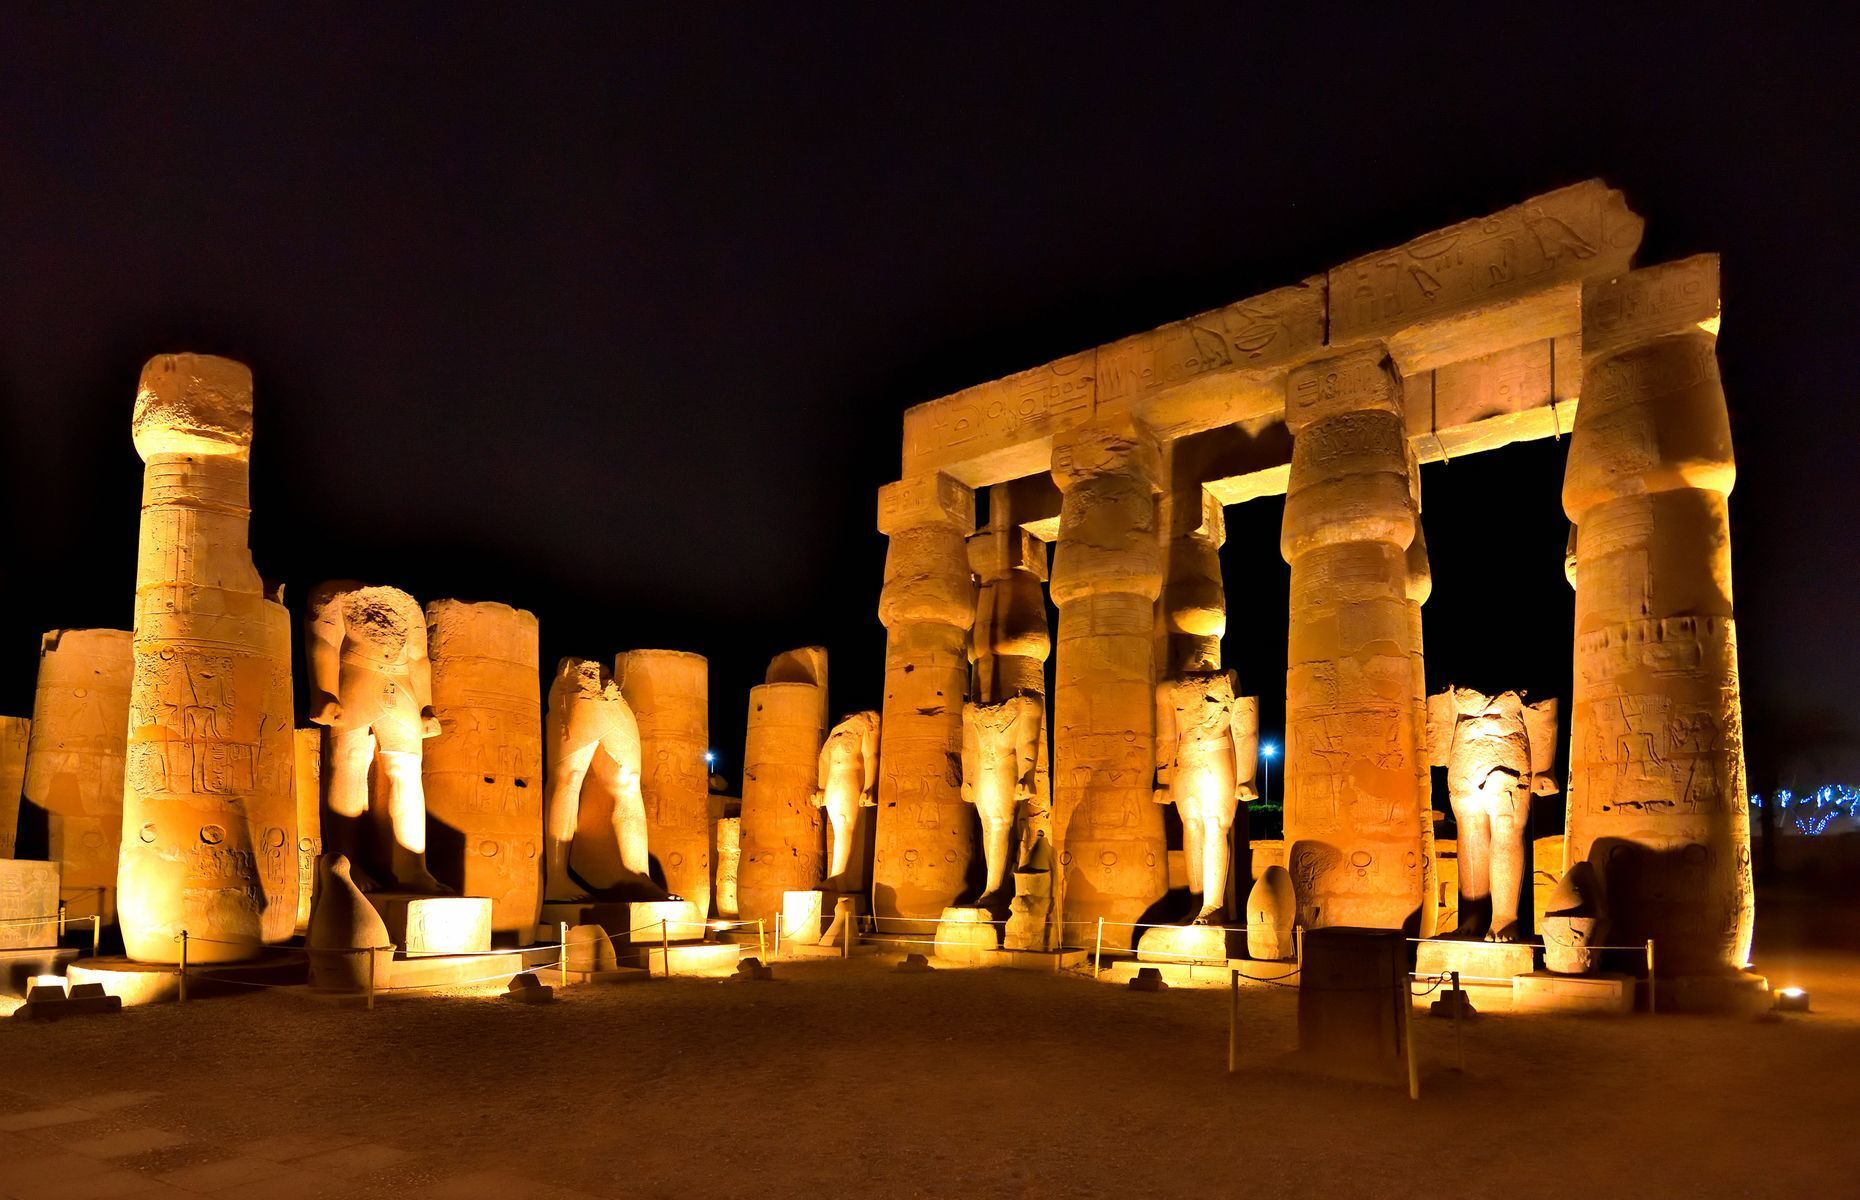 <p>Karnak, the oldest and largest religious complex from antiquity, was built over a period of <a href="https://www.introducingegypt.com/karnak-temple?_ga=2.3700278.763242201.1649002922-819378787.1649002922" rel="noreferrer noopener">two millennia in honour of various Egyptian deities</a>. In fact, the main temple, dedicated to Amun, was one of the most sacred sites in the country. In the 4th century, however, a room within the complex began to be <a href="https://www.worldhistory.org/Karnak/" rel="noreferrer noopener">used for Christian services</a>, as evidenced by the decorations still visible on the walls. The site is <a href="https://america.cgtn.com/2015/06/10/temple-of-karnak-has-drawn-visitors-for-thousands-of-years" rel="noreferrer noopener">one of the country’s most visited places</a>, welcoming <a href="https://www.macrotrends.net/countries/EGY/egypt/tourism-statistics" rel="noreferrer noopener">14 million international tourists</a> before the pandemic.</p>